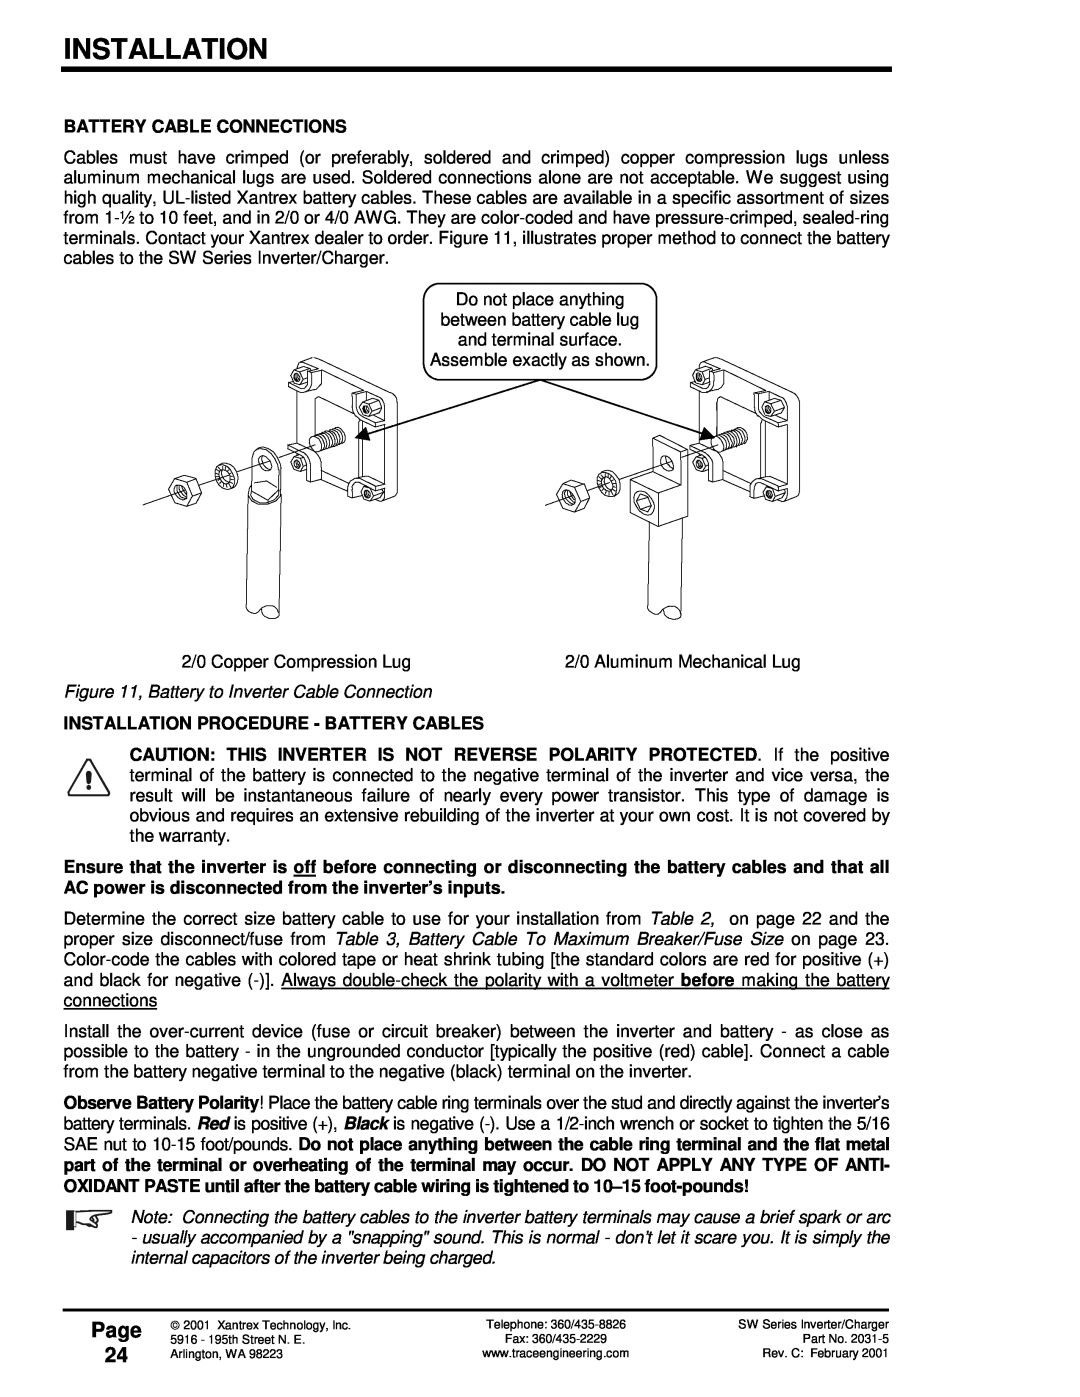 Xantrex Technology SW Series owner manual Page 24, Battery Cable Connections, Installation Procedure - Battery Cables 